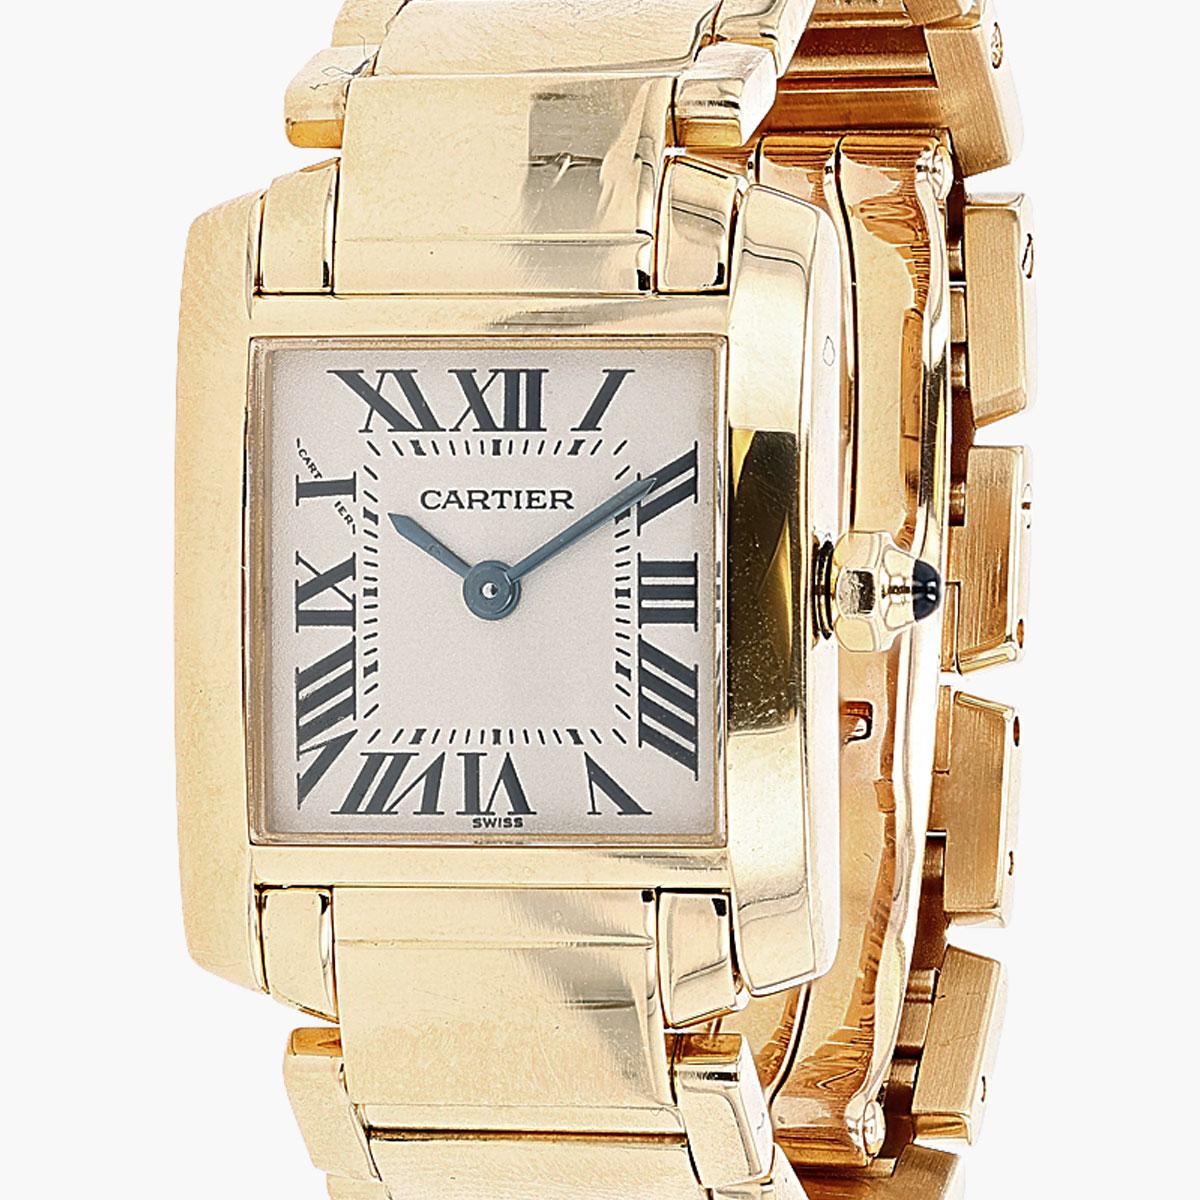 Cartier 18k Yellow Gold Tank Francaise Quartz watch,  size-small (20x25mm) featuring  Ivory dial with Roman Numerals. Model number 2385, quartz movement.   High polished link bracelet with double fold over clasp. Mint condition, recently serviced. 